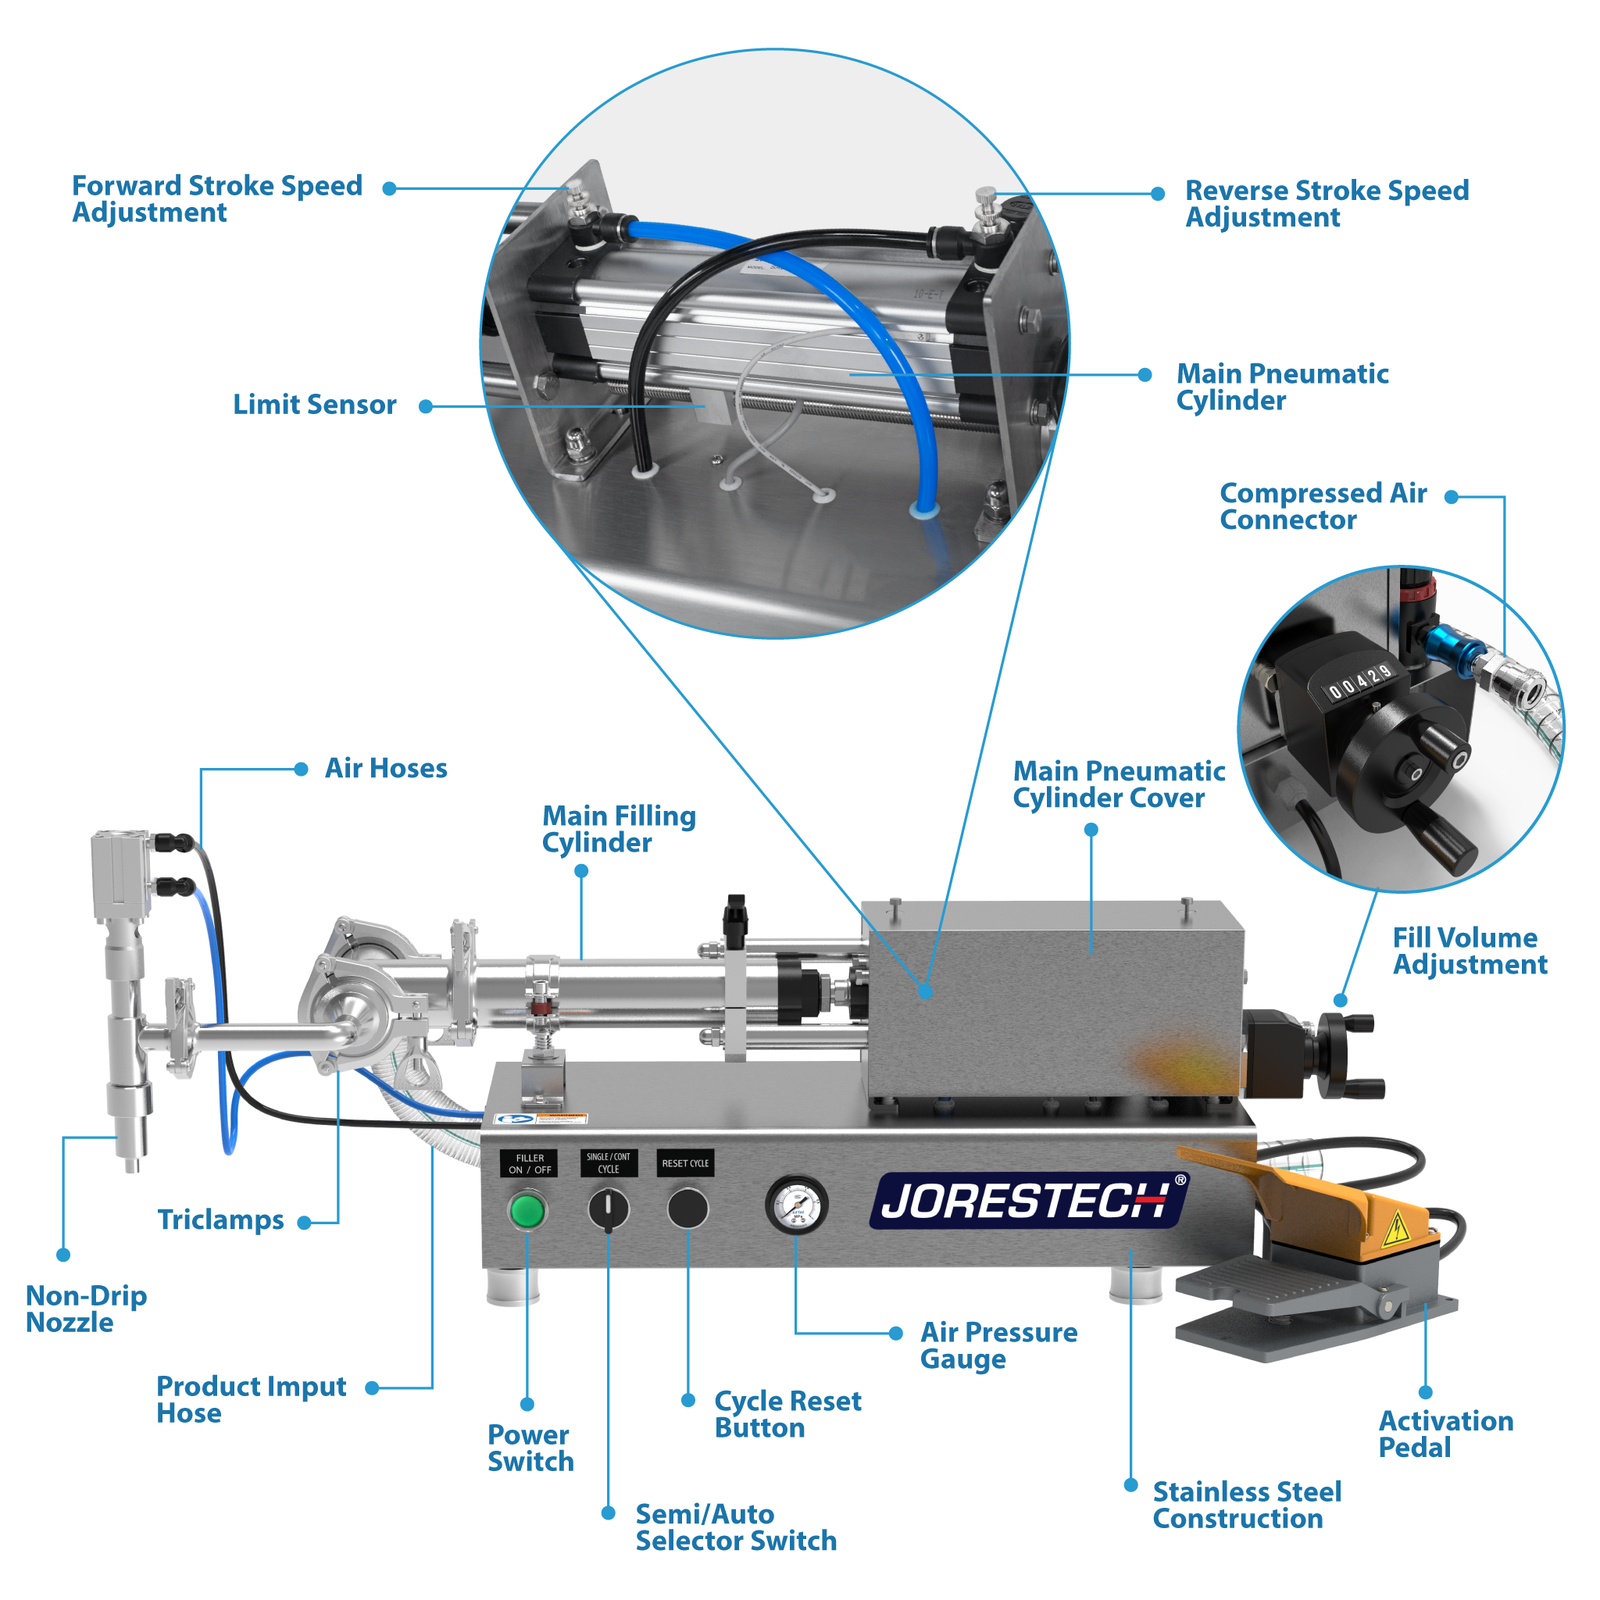 Infographic of the Jorestech Liquid Piston Filler shown in a frontal view over white background. Many call-outs are signaling the different parts of the machine in blue font. Two of the main parts mentioned are the Main Pneumatic Cylinder and the Fill Volume Adjuster